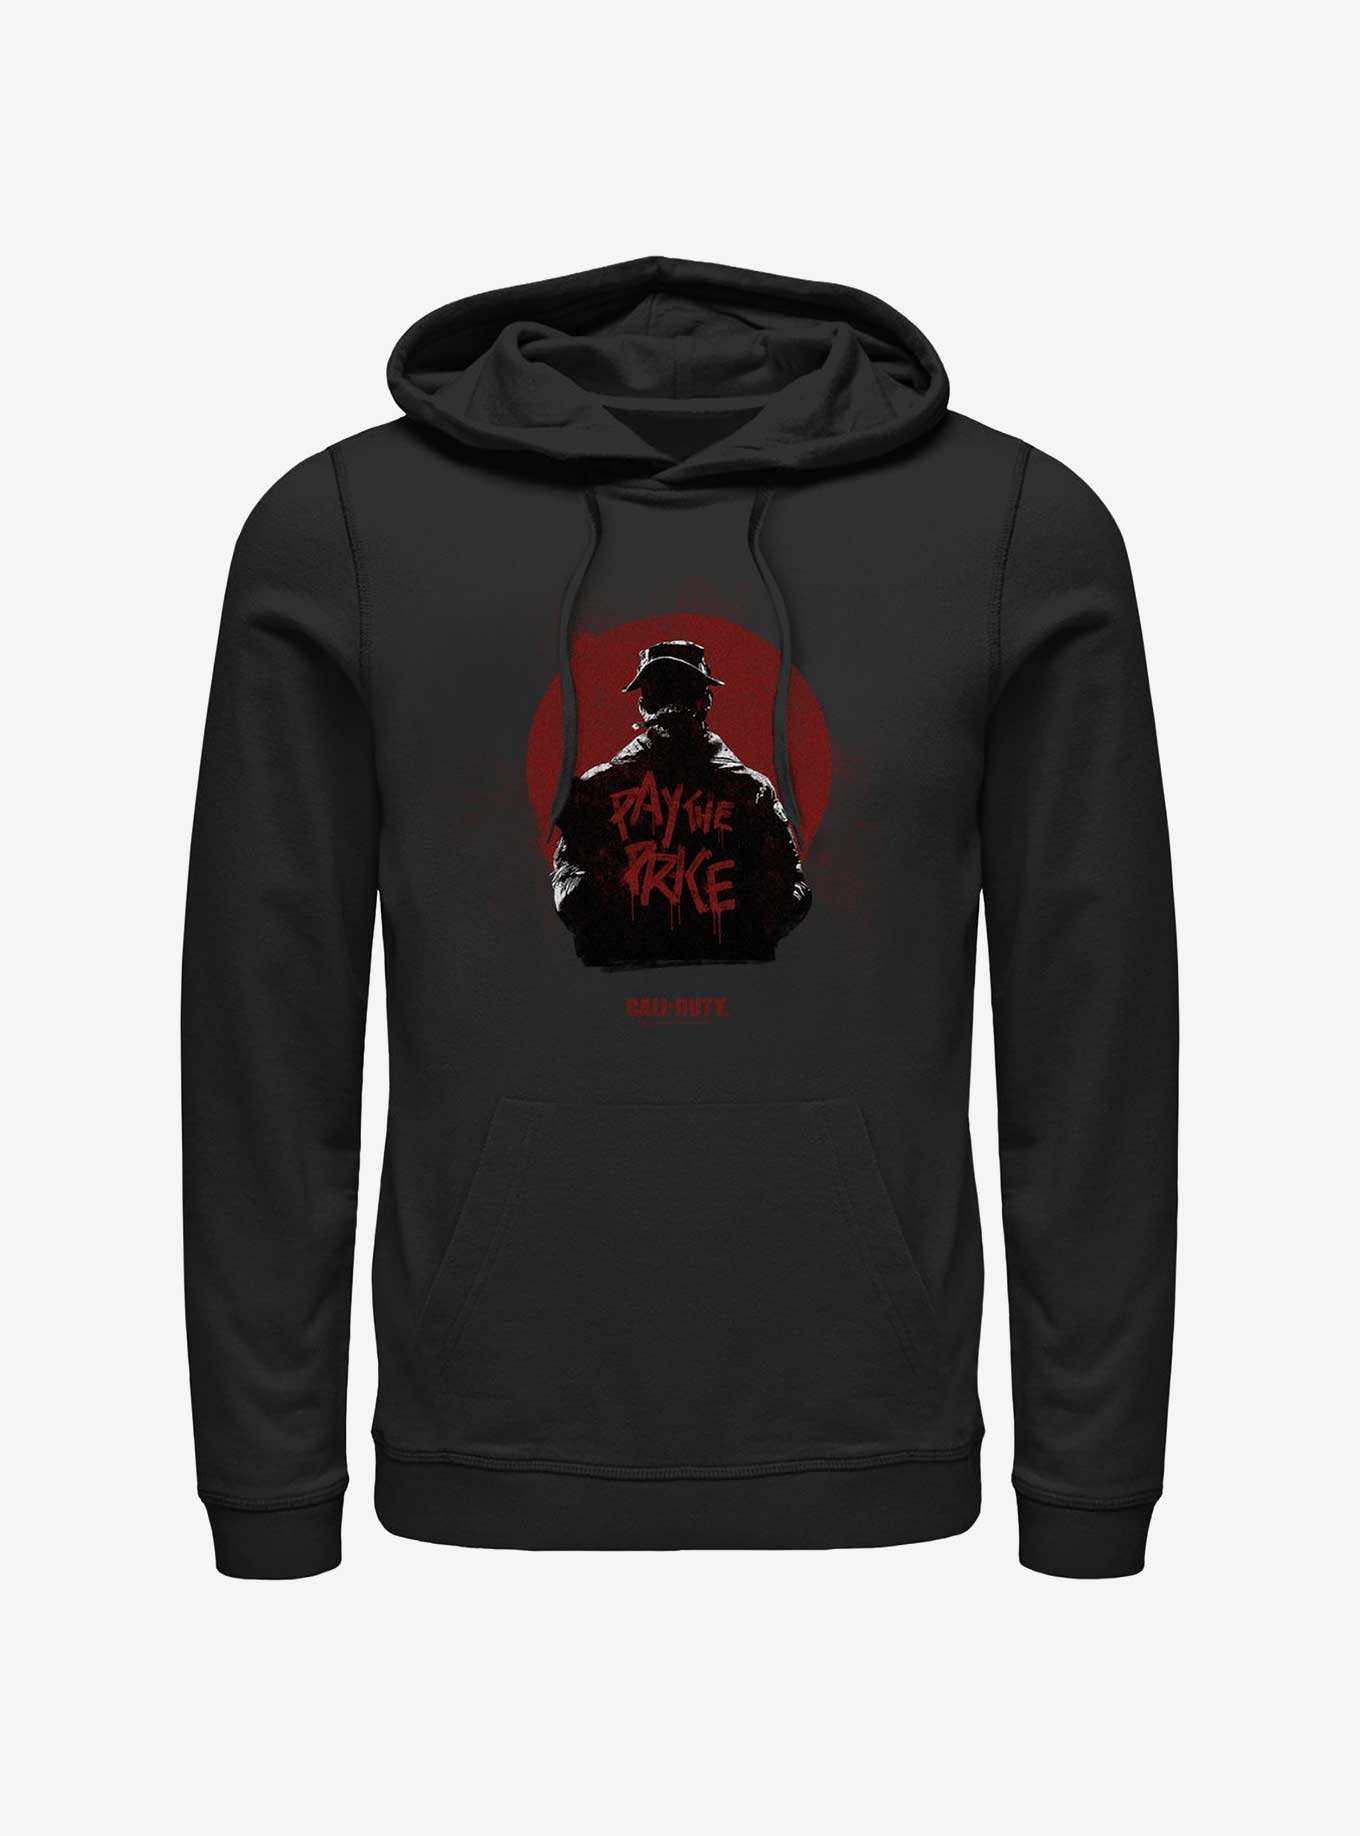 Call of Duty Blood Moon Pay The Price Hoodie, , hi-res